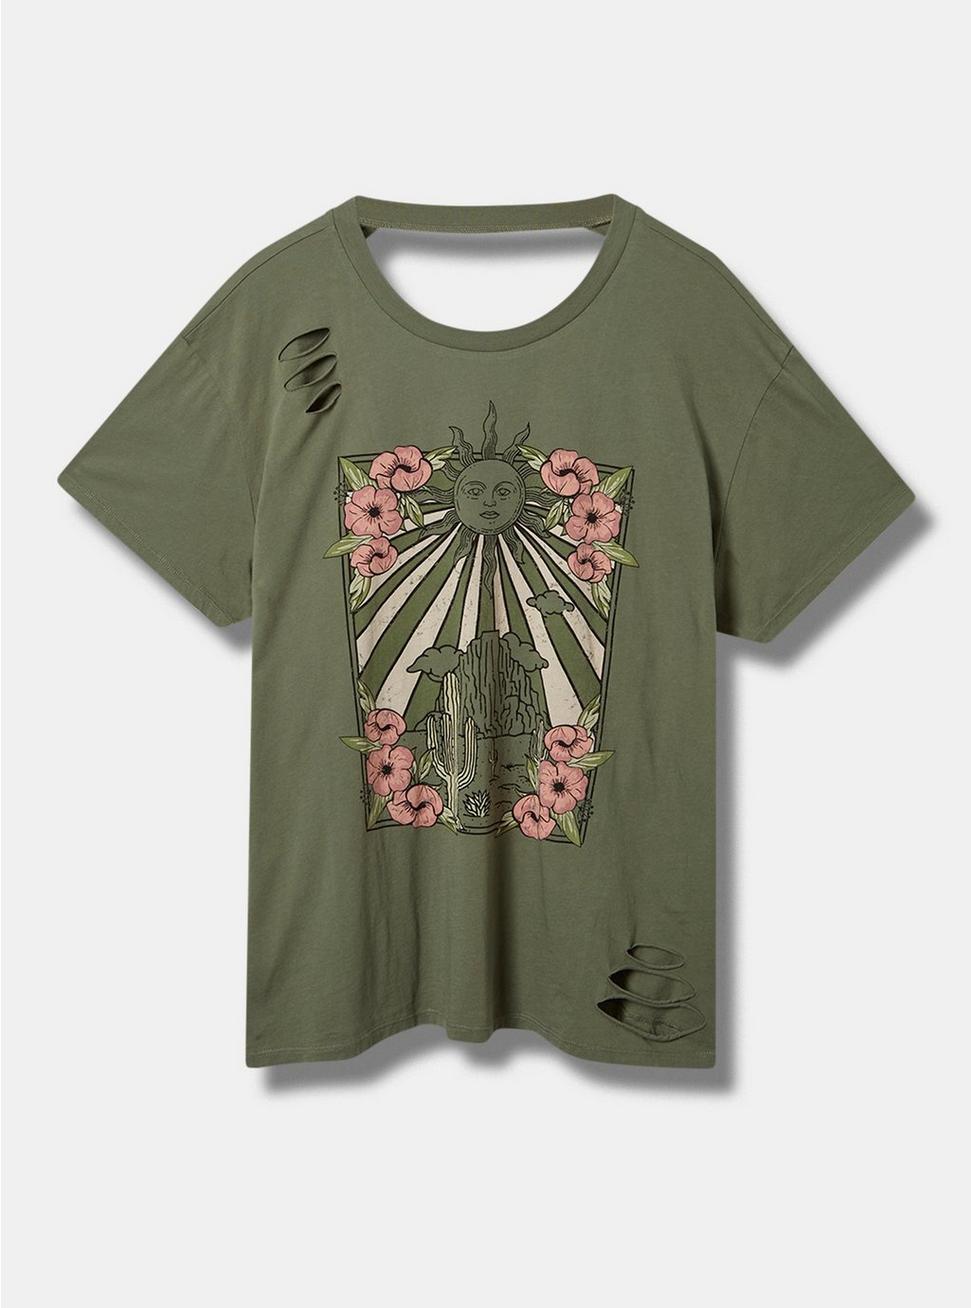 Floral Desert Relaxed Fit Cotton Crew Neck Open Back Distressed Tee, GREEN, hi-res